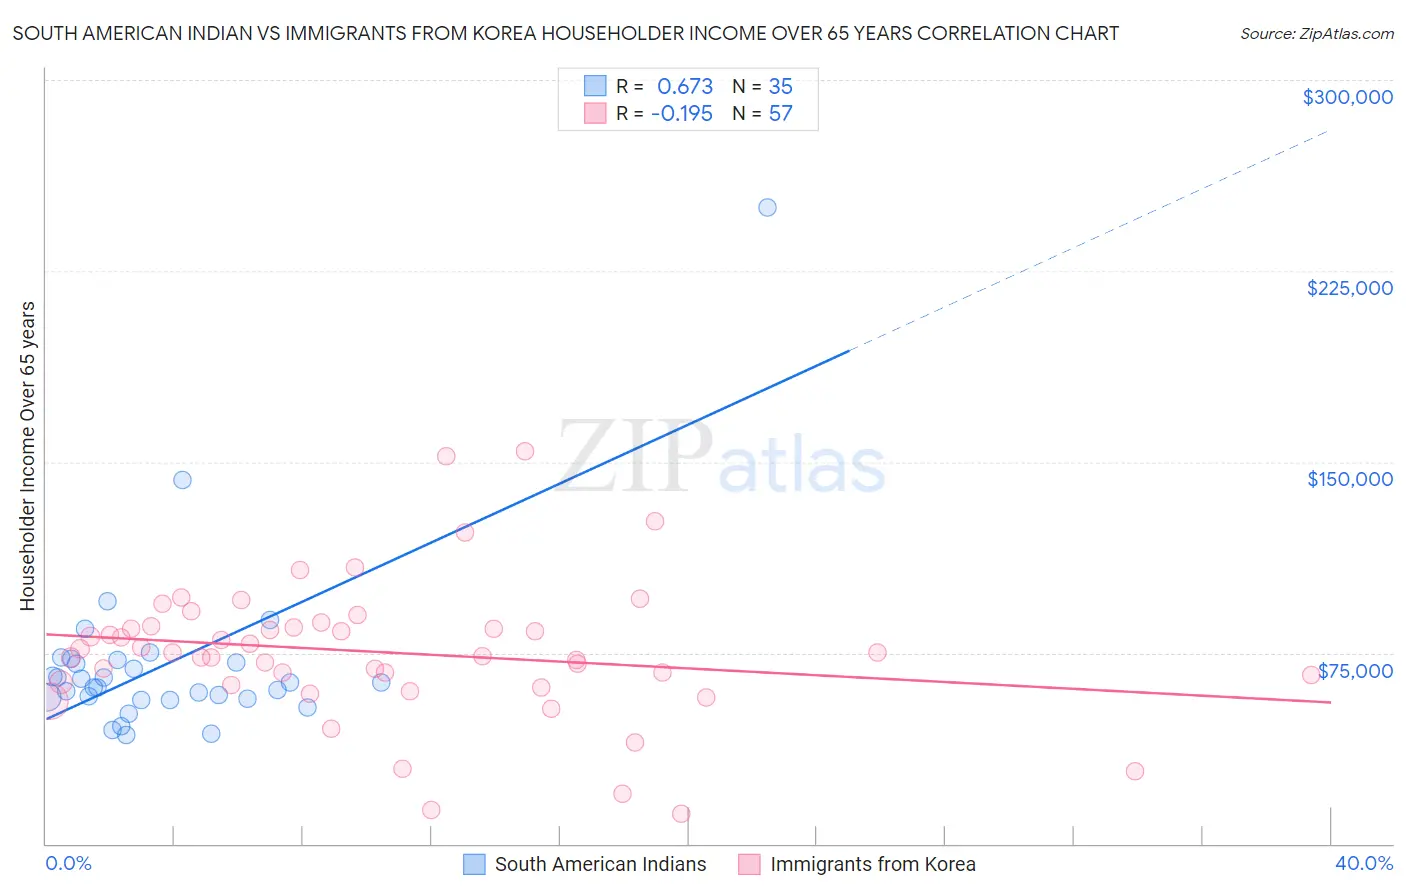 South American Indian vs Immigrants from Korea Householder Income Over 65 years